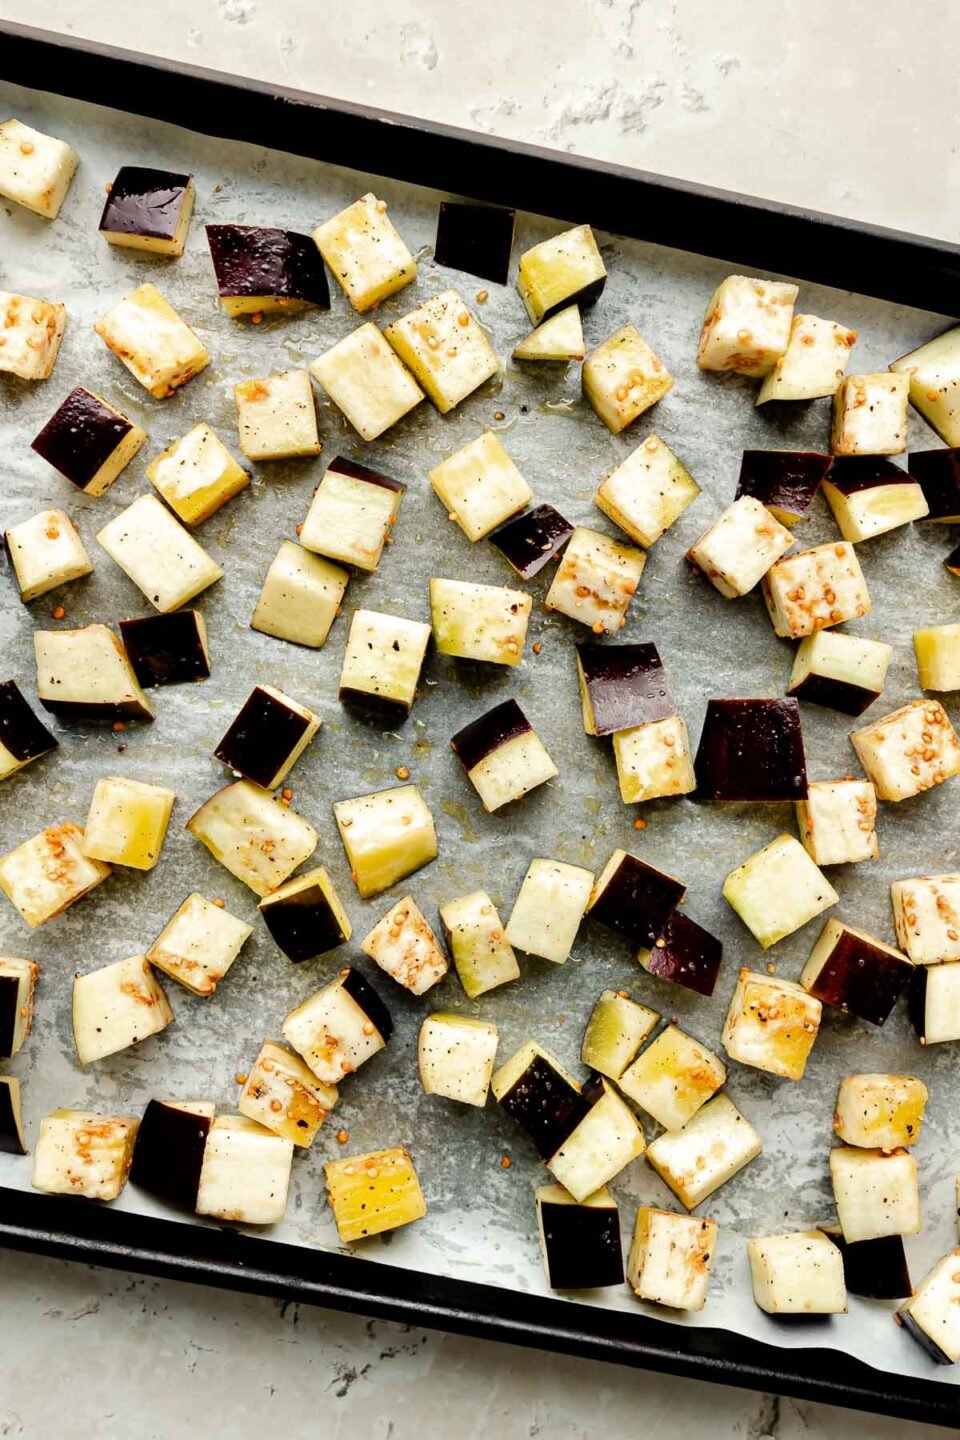 An overhead shot of a sheet pan of diced eggplant on parchment paper atop a beige surface.